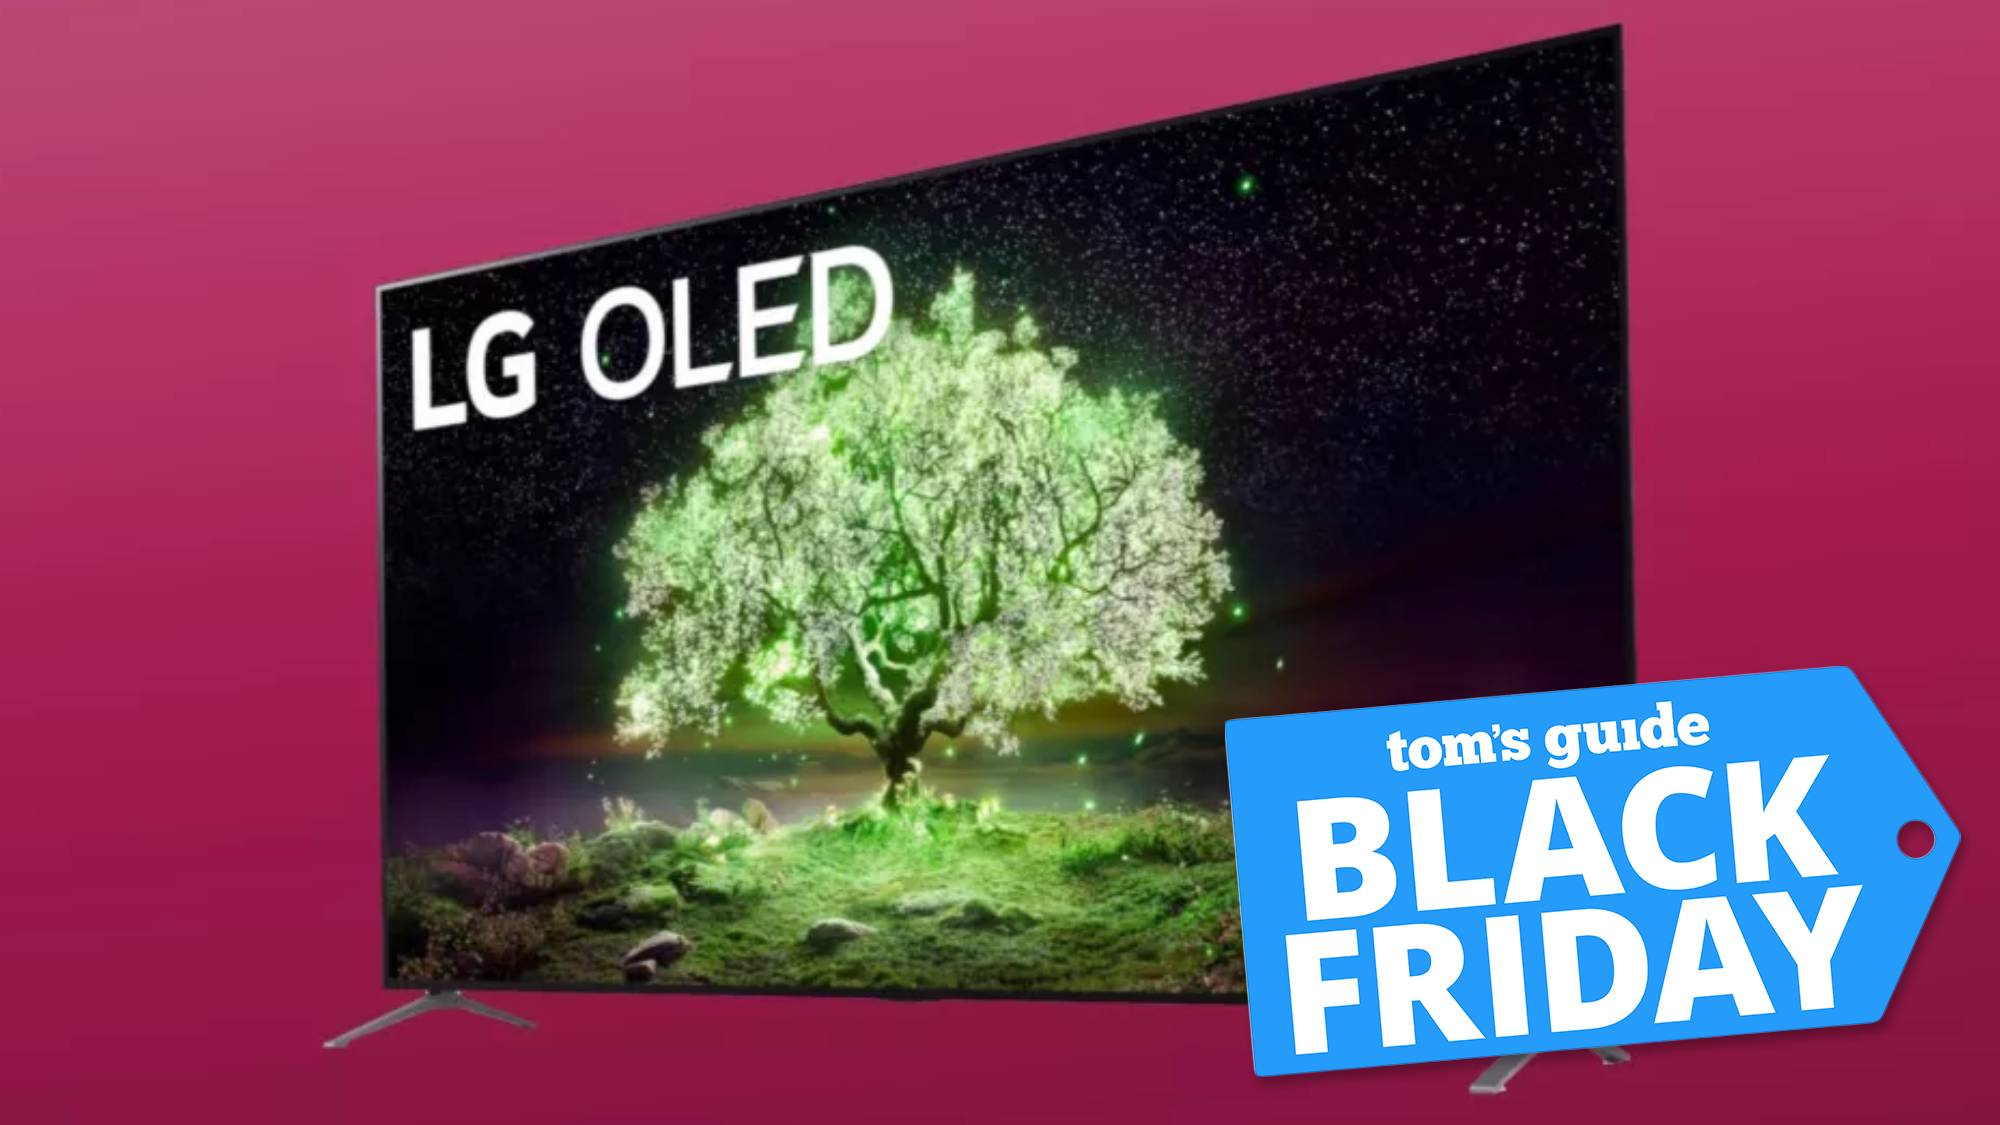 LG A1 OLED TV on a background with a Black Friday deal tag